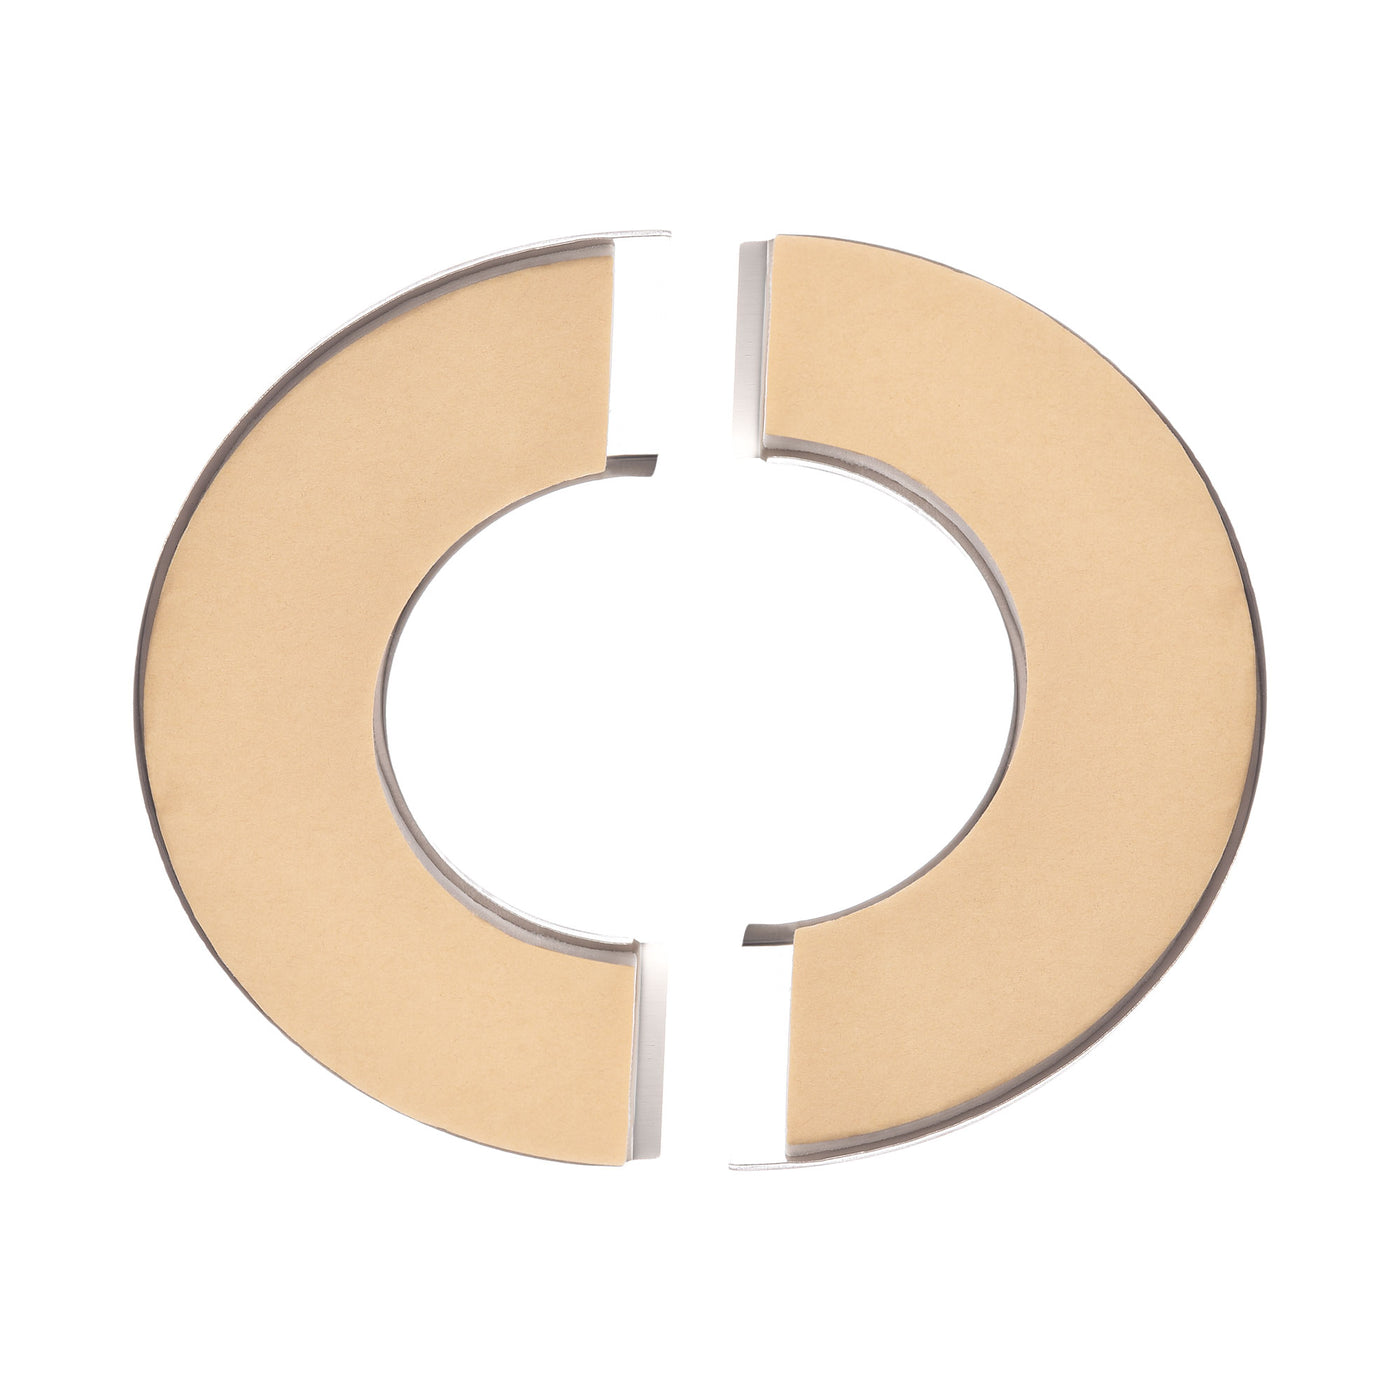 uxcell Uxcell Wall Split Flange, Stainless Steel Round Escutcheon Plate for 60mm Diameter Pipe 2Pcs